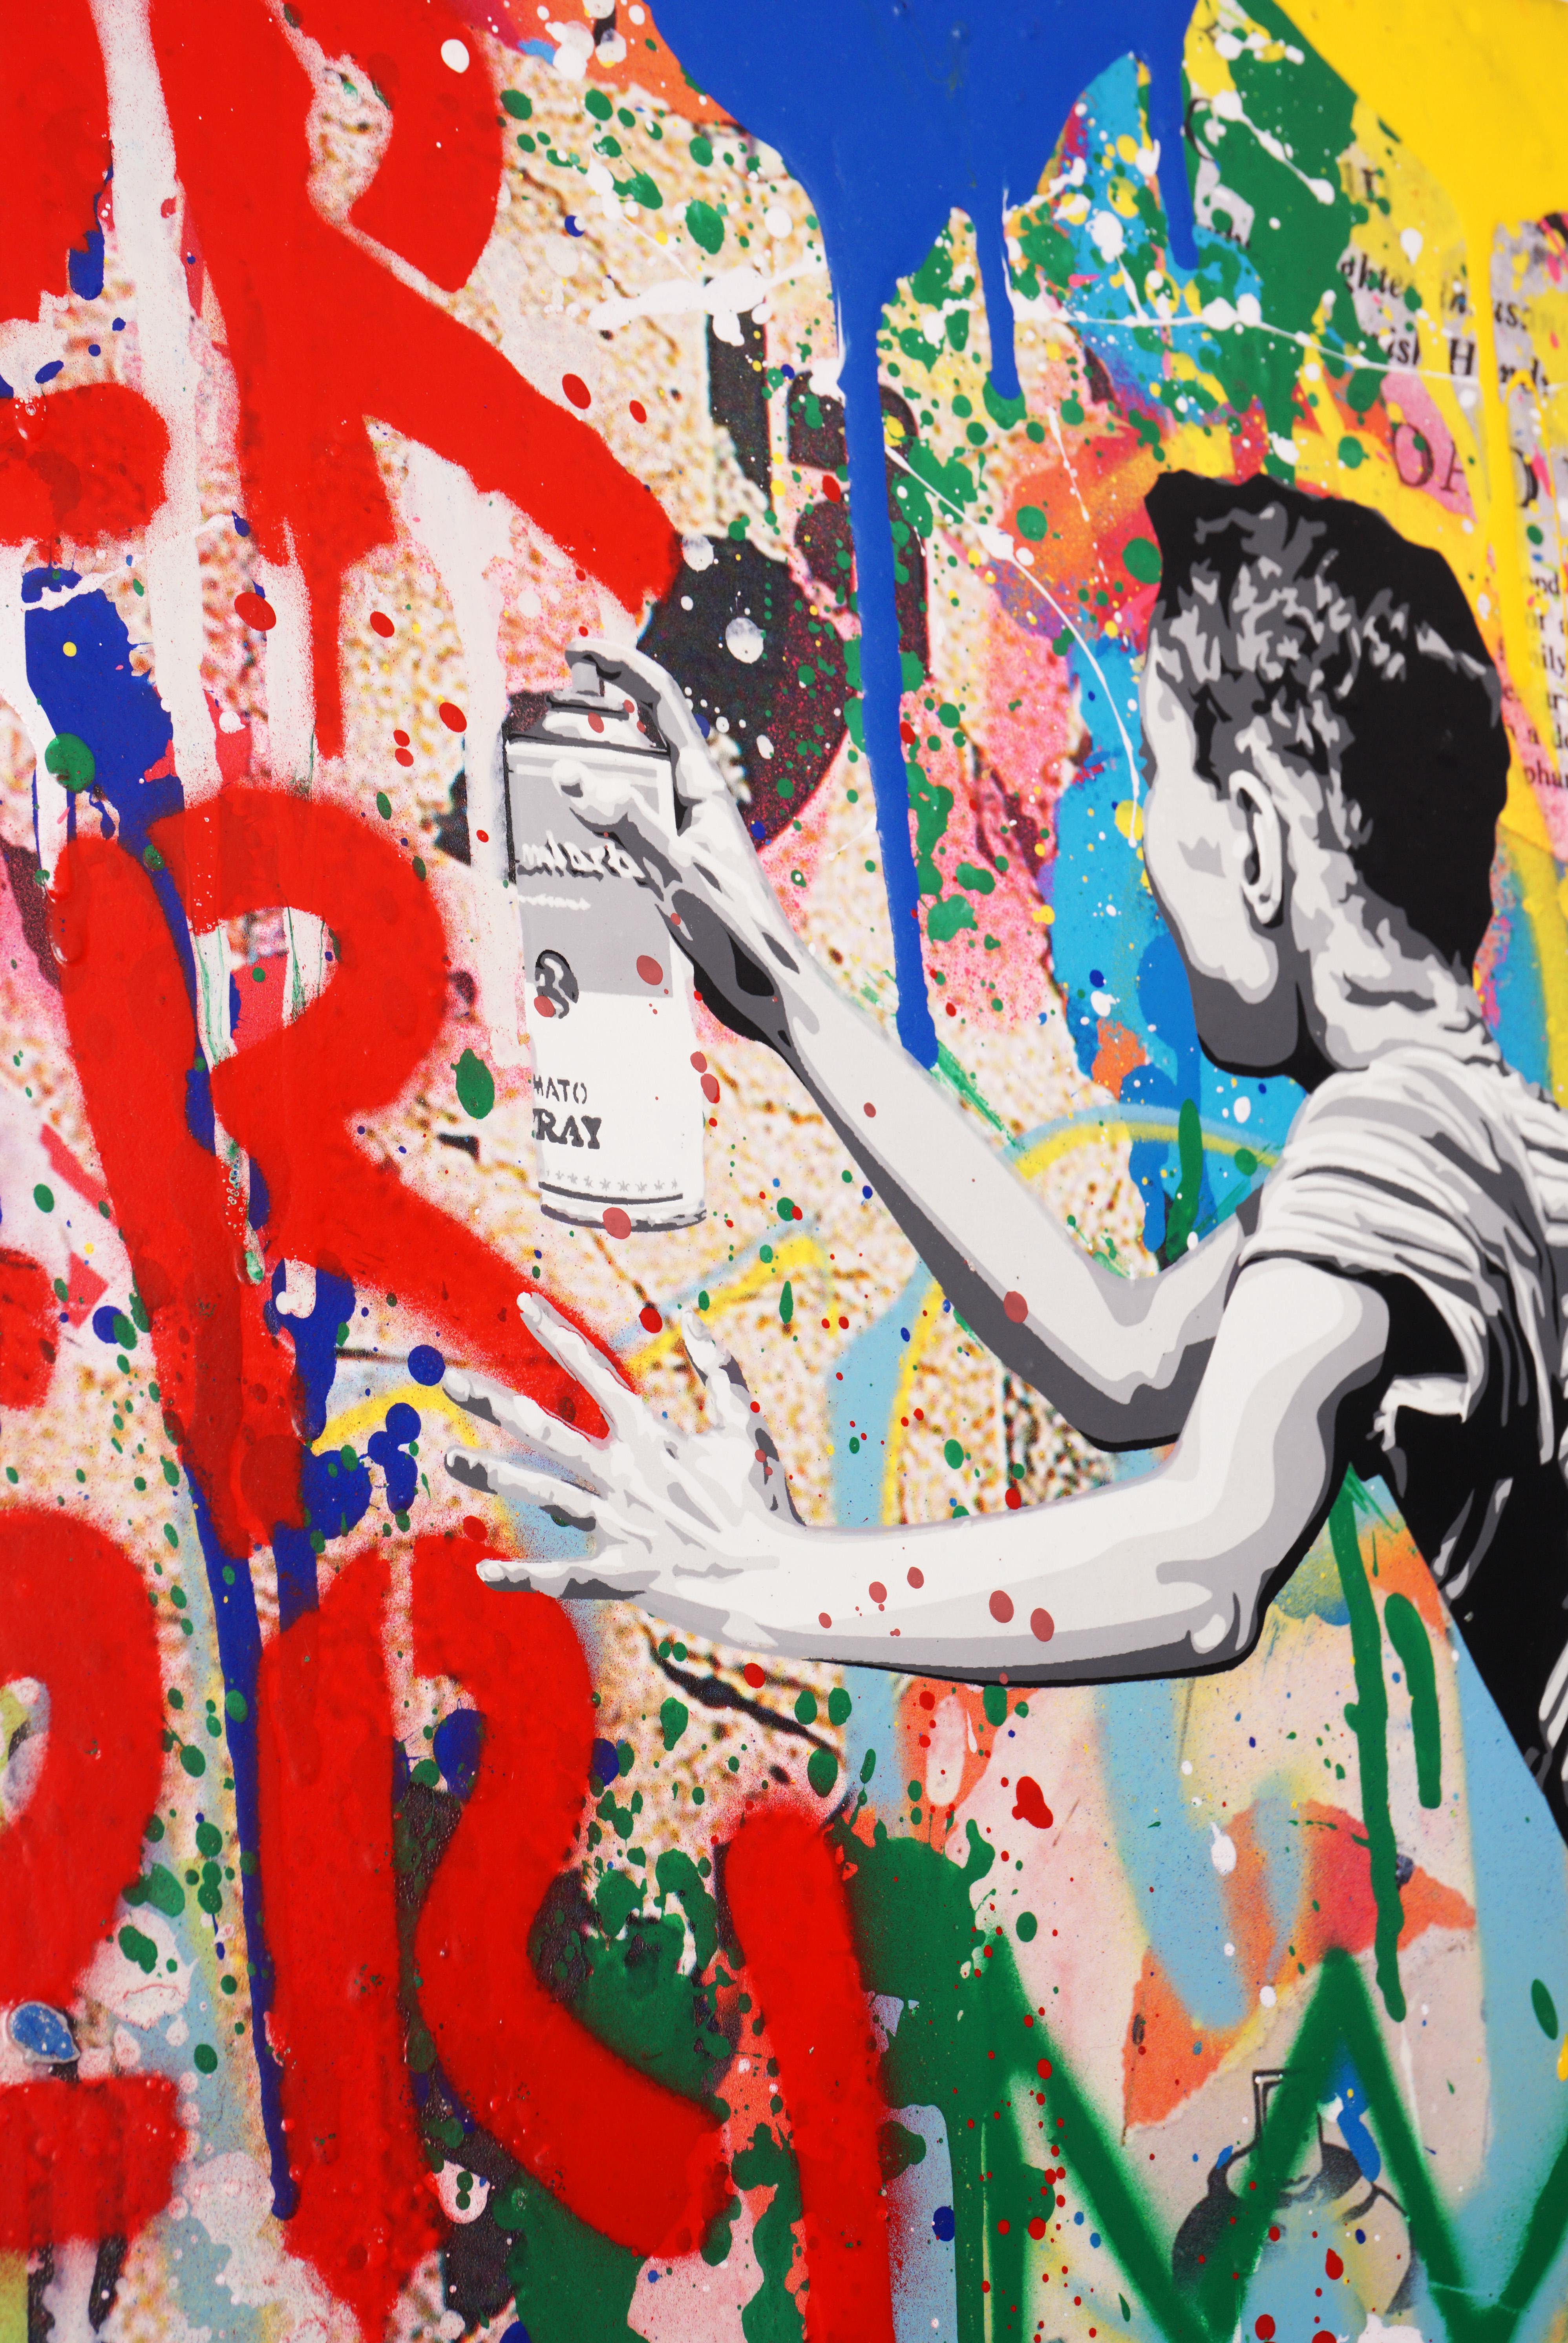 The graffiti street-art meets fine-art 'Never Give Up' is a pop art masterpiece made with dripping multicolor acrylic paint, layered stencil, and mixed media on paper, created in 2021 by contemporary street-artist, Mr. Brainwash. The boldly